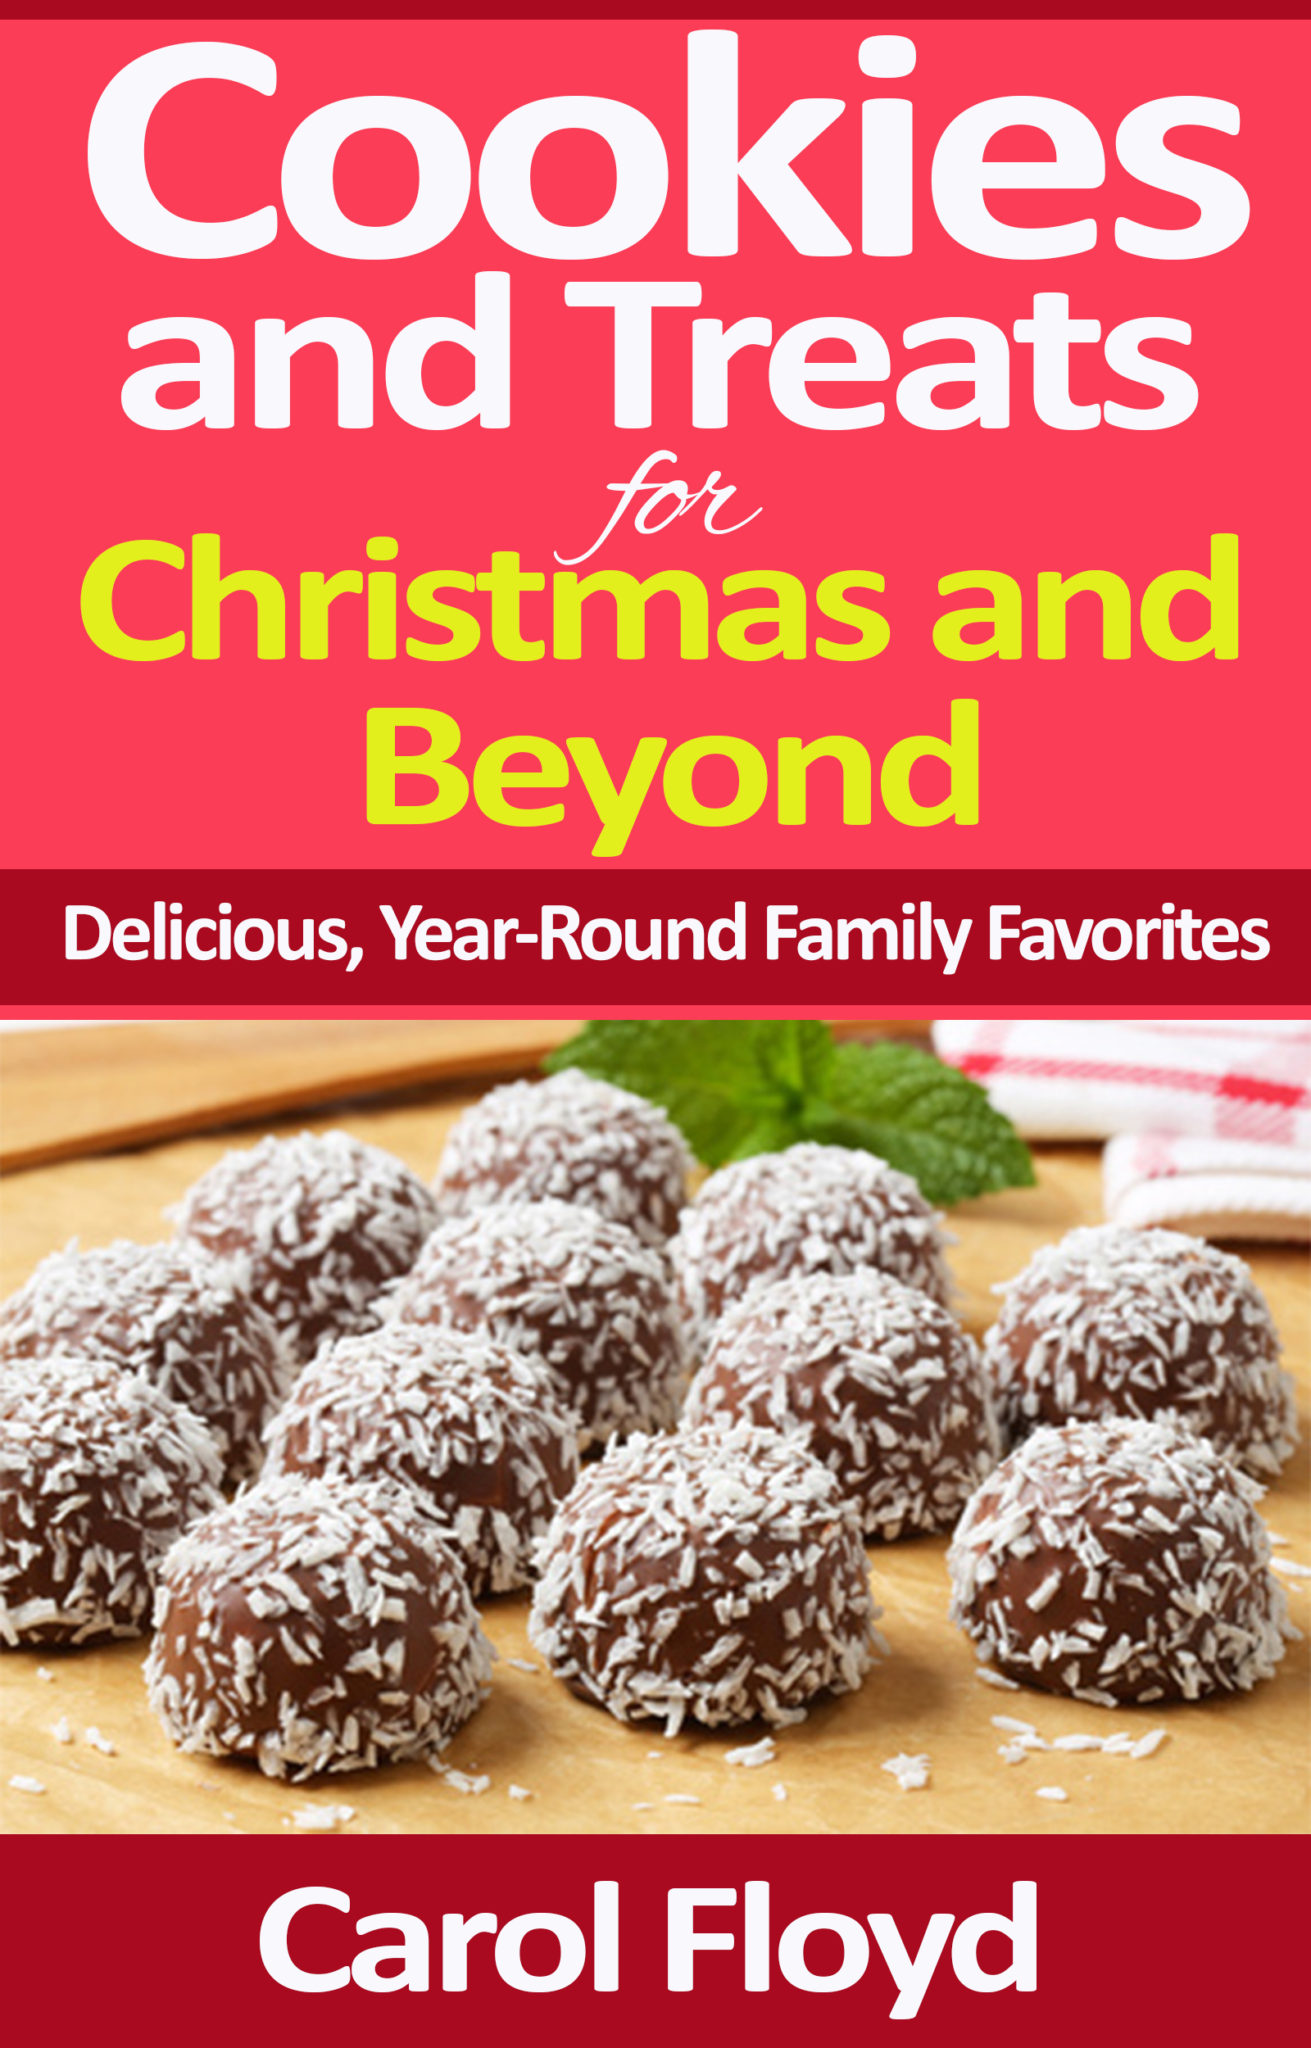 Cookies and Treats for Christmas and Beyond: Delicious, Year Round Family Favorites by Carol Floyd